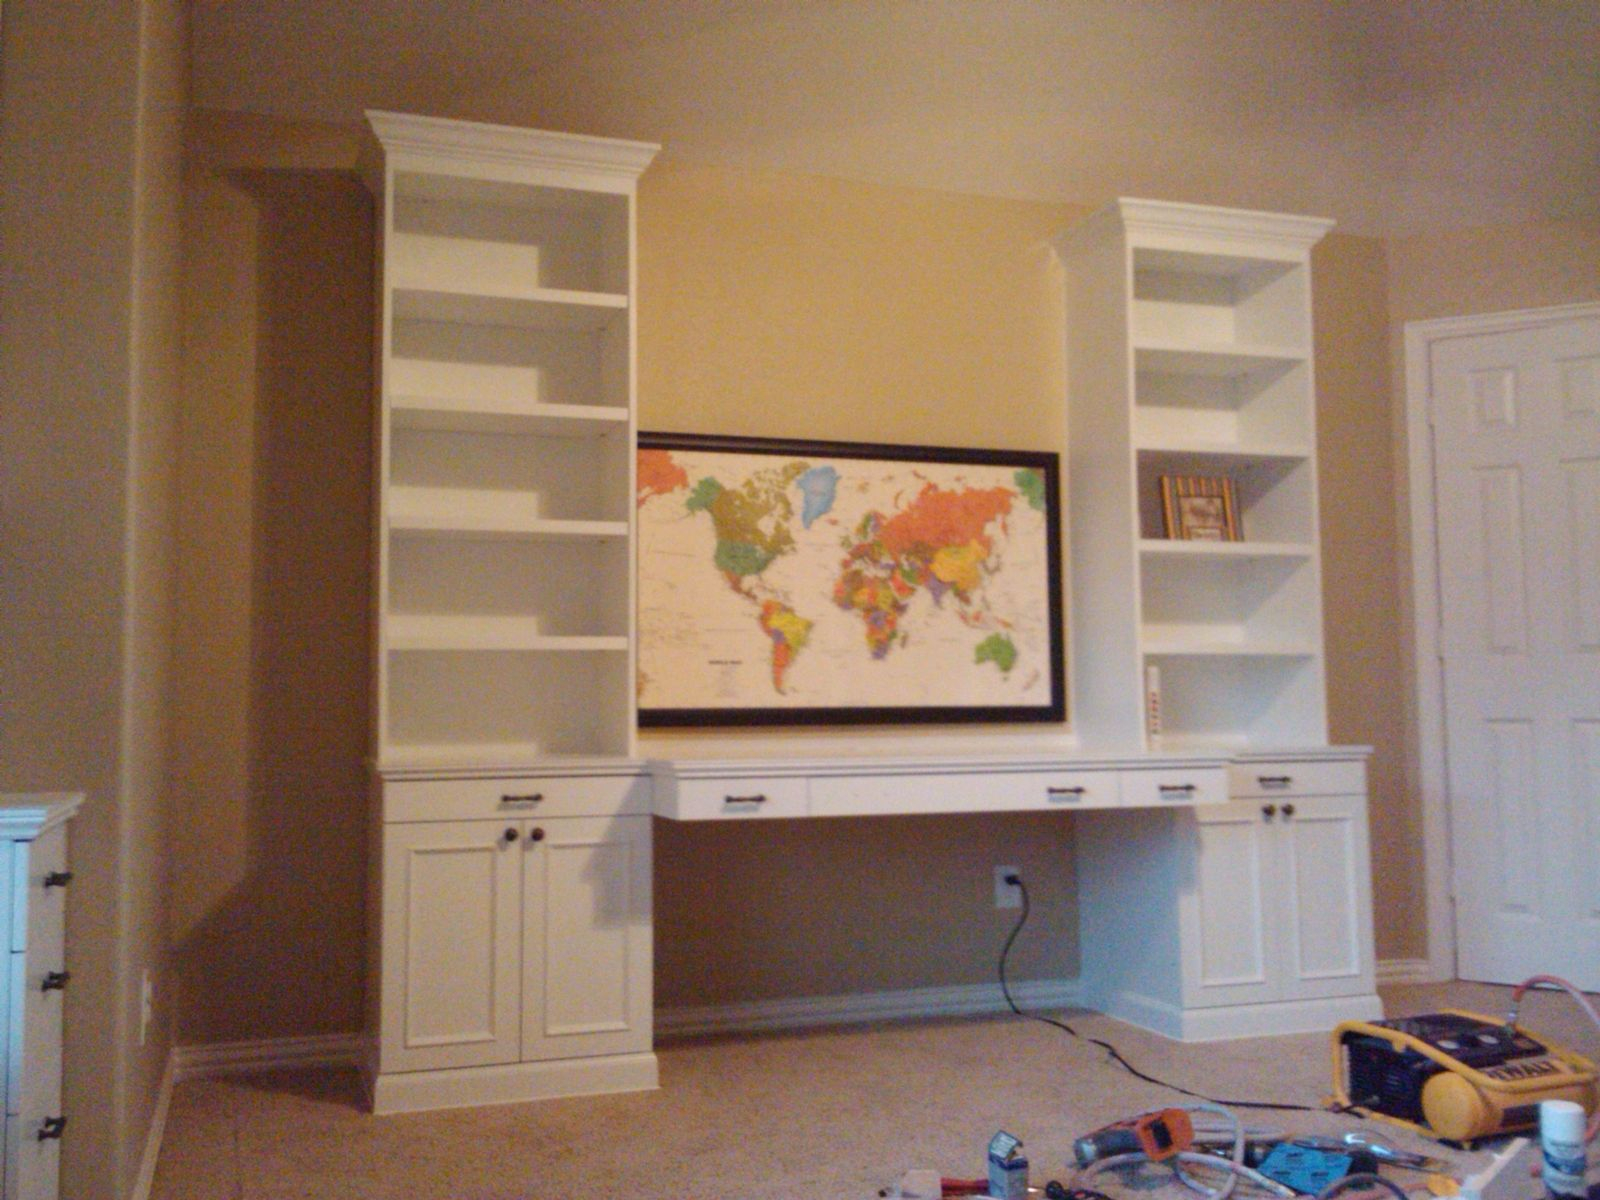 Handmade Playroom Project W Toy Boxes Bookcases Desk in size 1600 X 1200